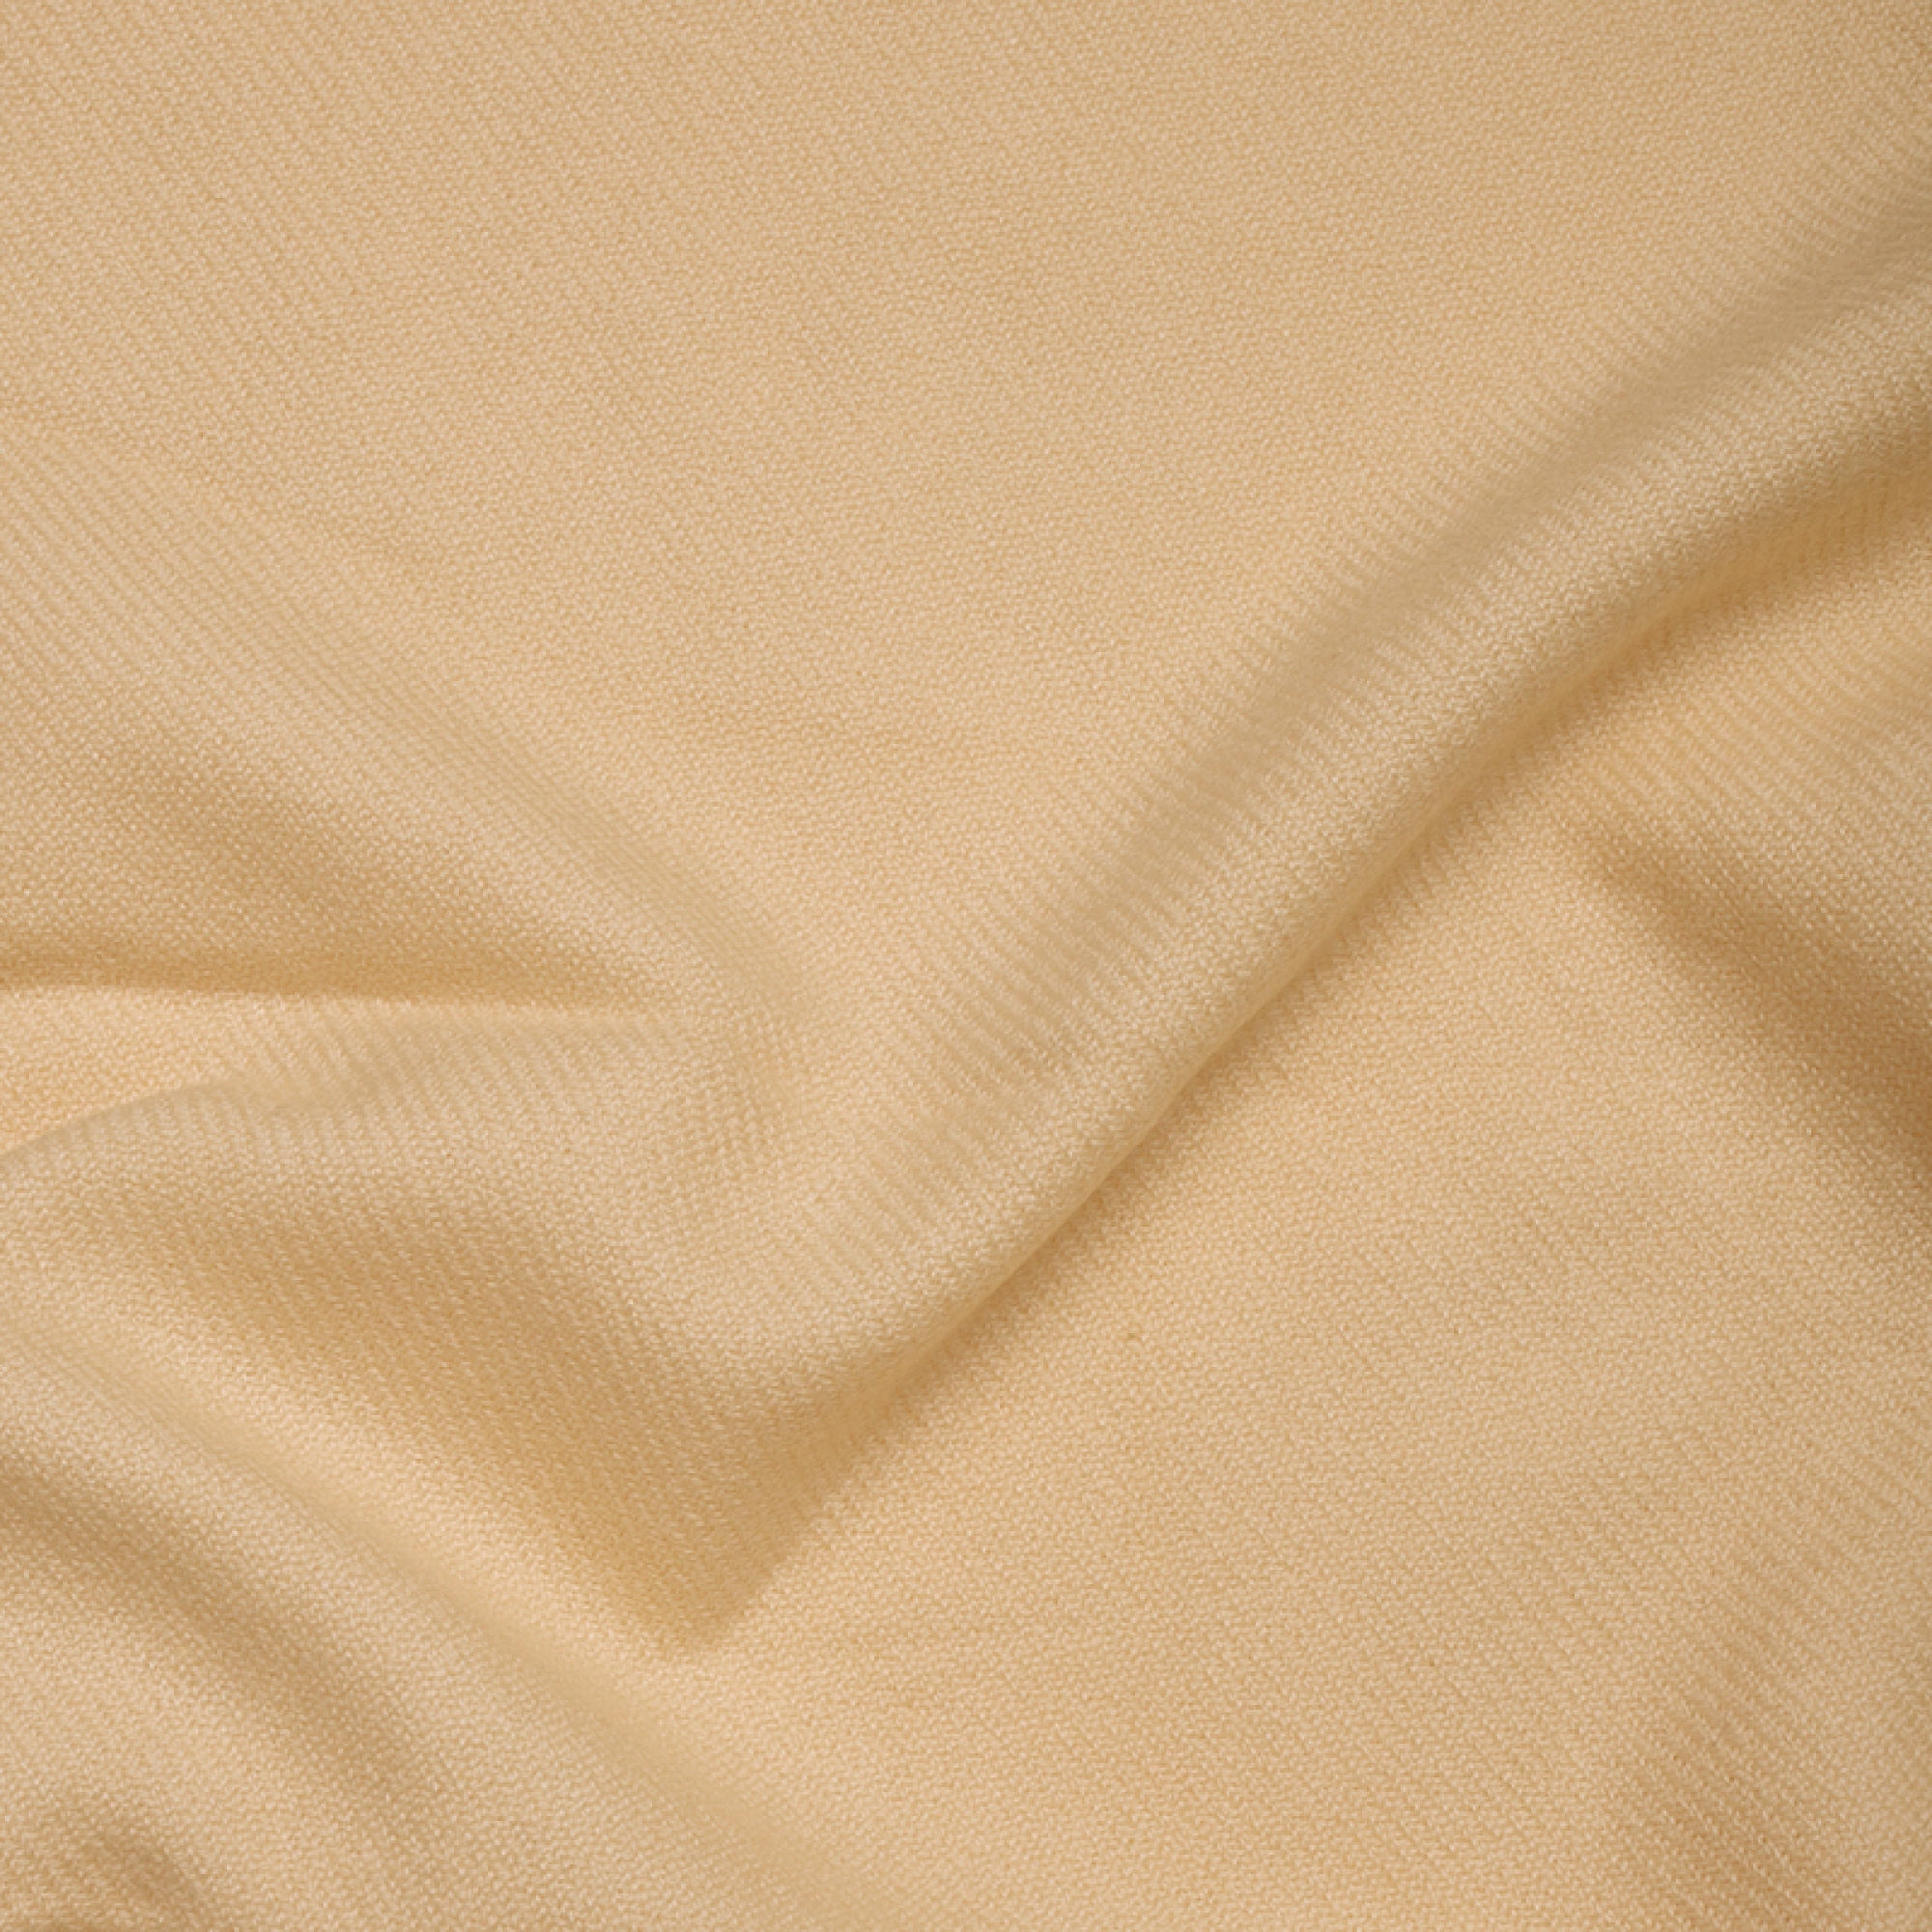 Cashmere accessories cocooning toodoo plain m 180 x 220 champagne 180 x 220 cm